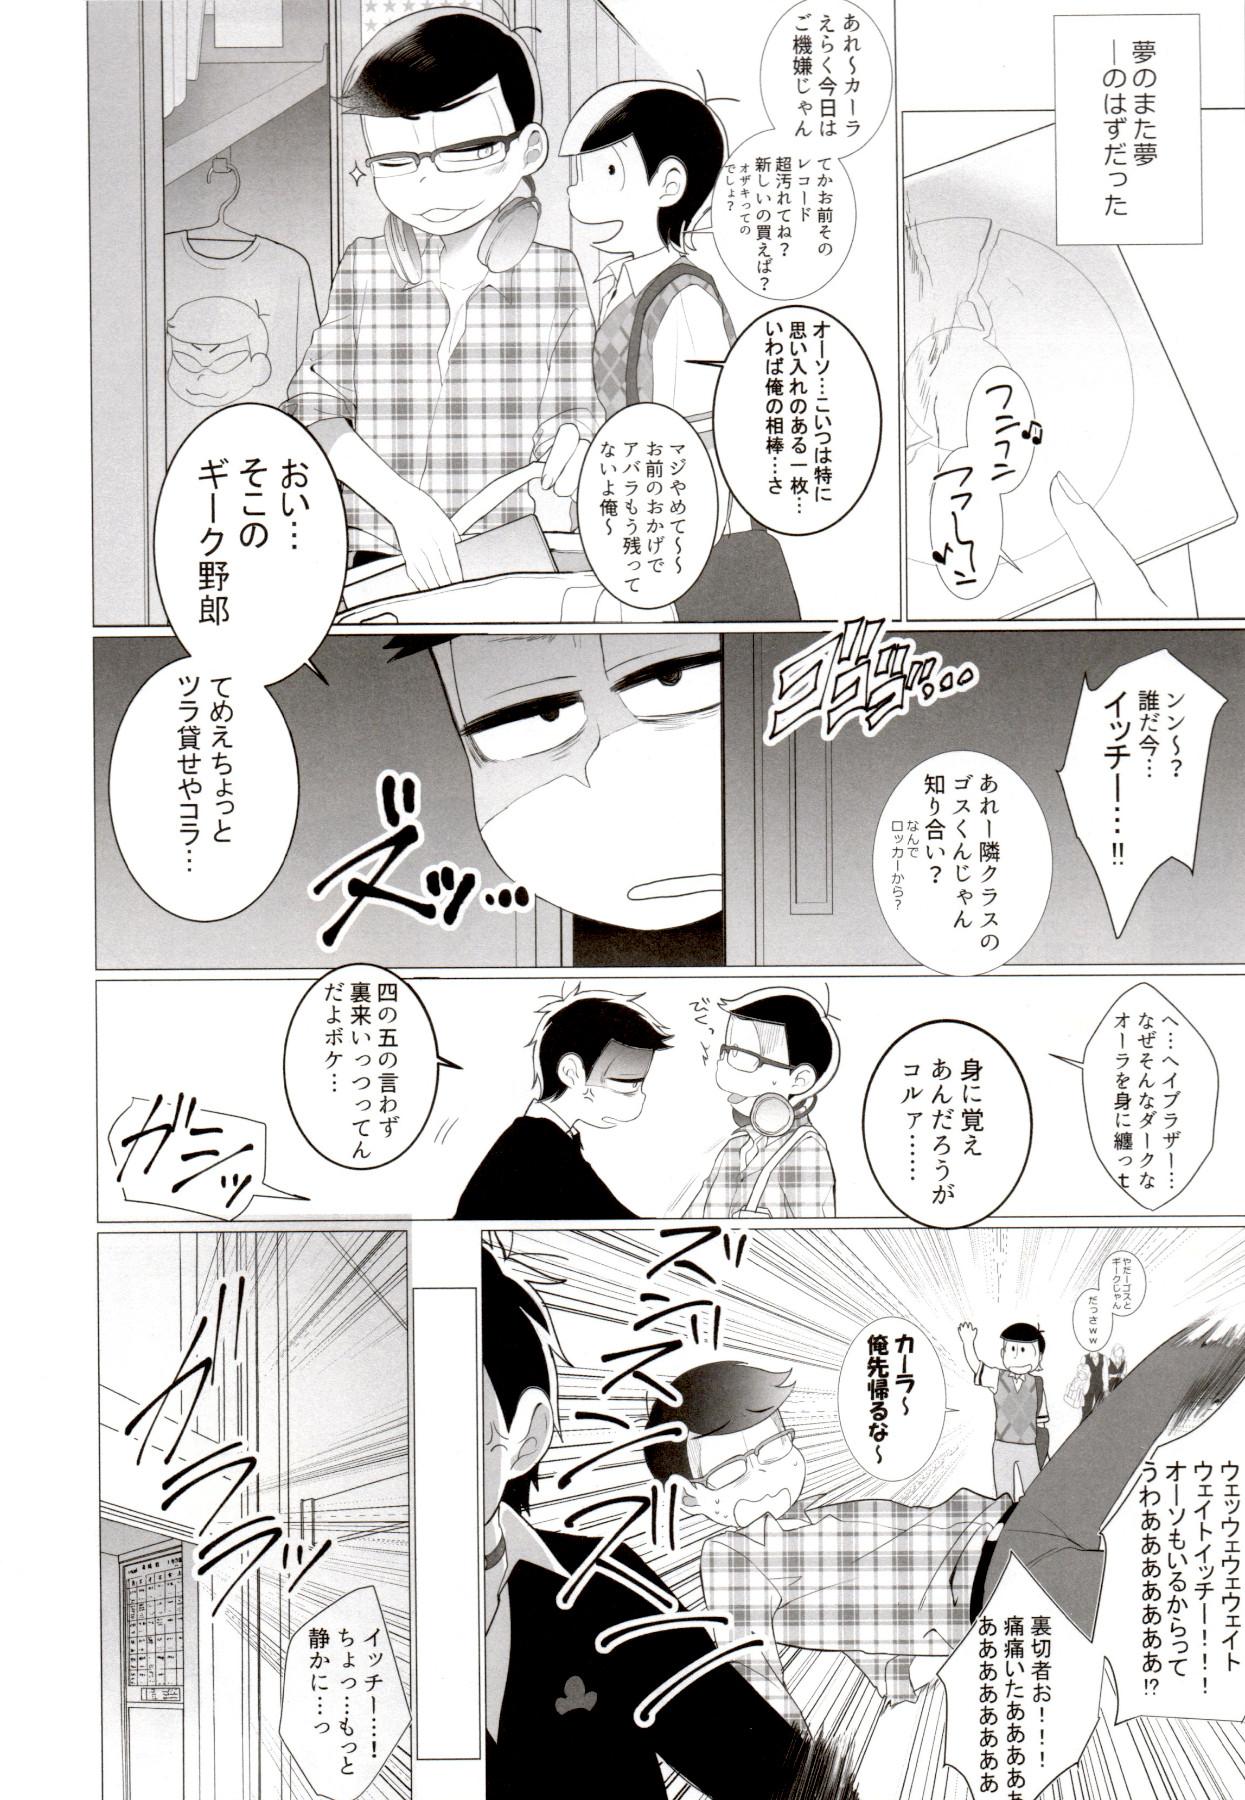 Funny IT IS THE COLORFUL LIFE 2 - Osomatsu-san Gay Emo - Page 5